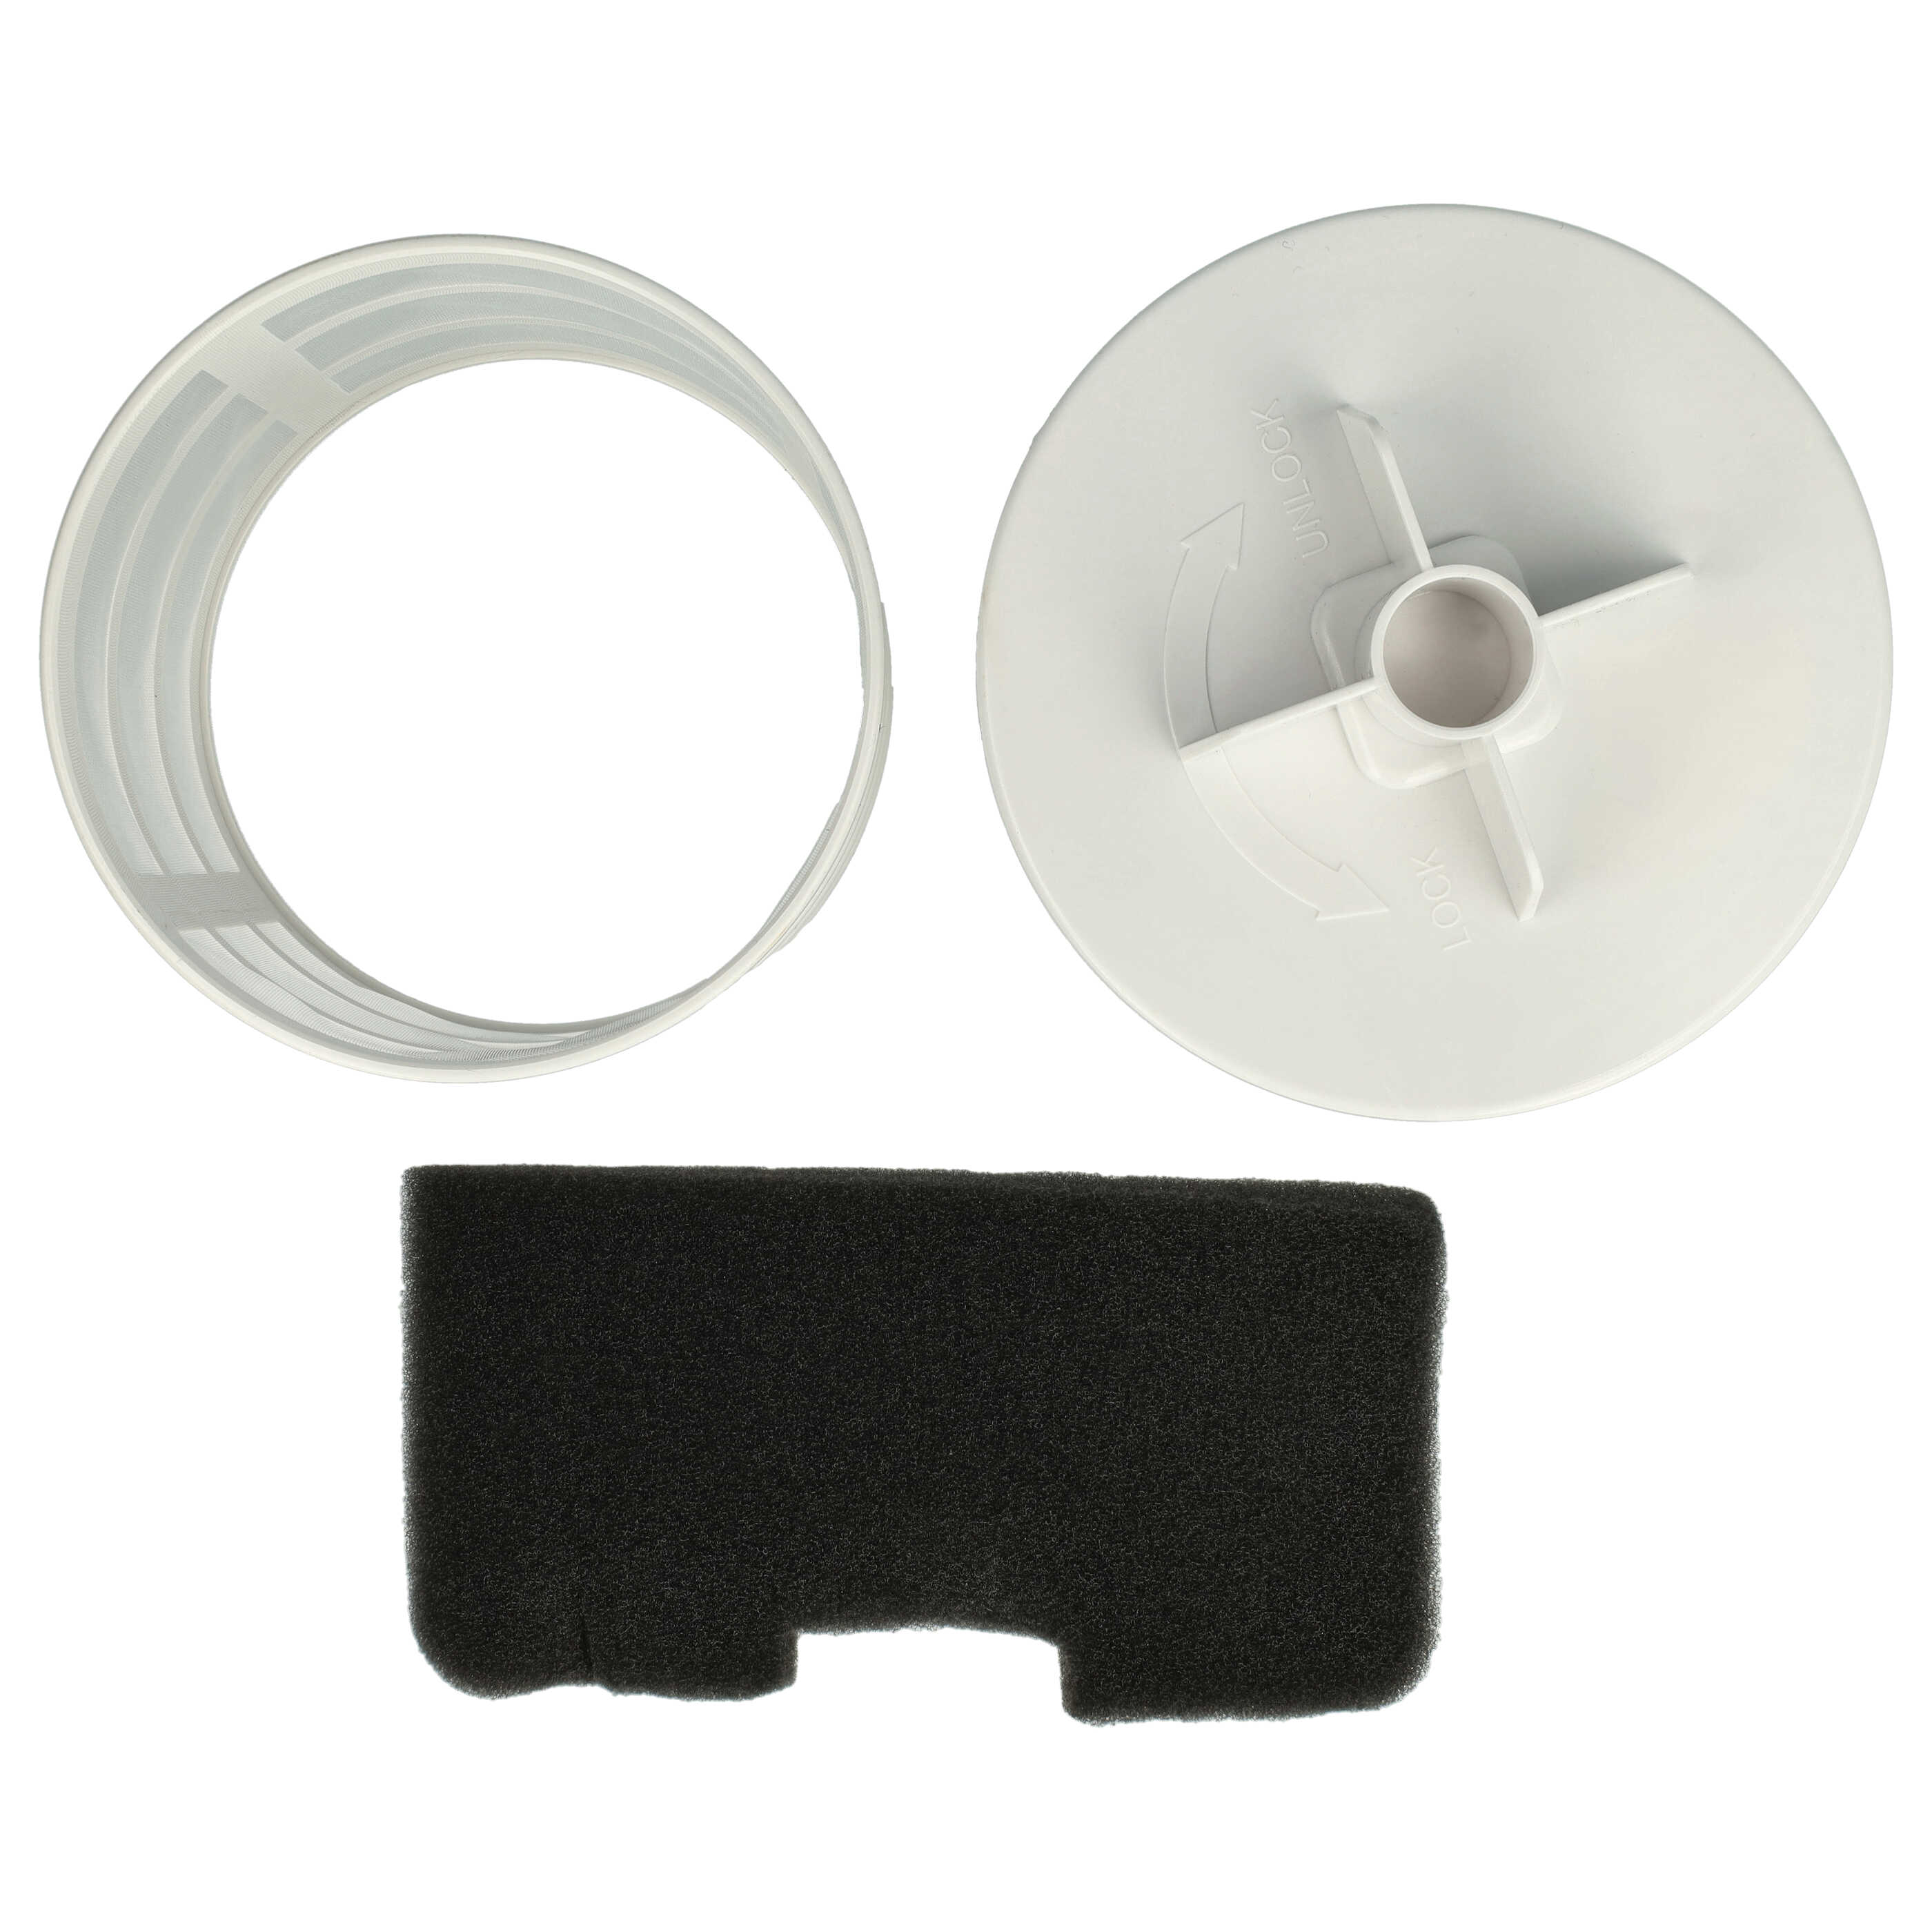 Filter Set replaces Hoover 35601328, U66 for Hoover Vacuum Cleaner - 2 pcs